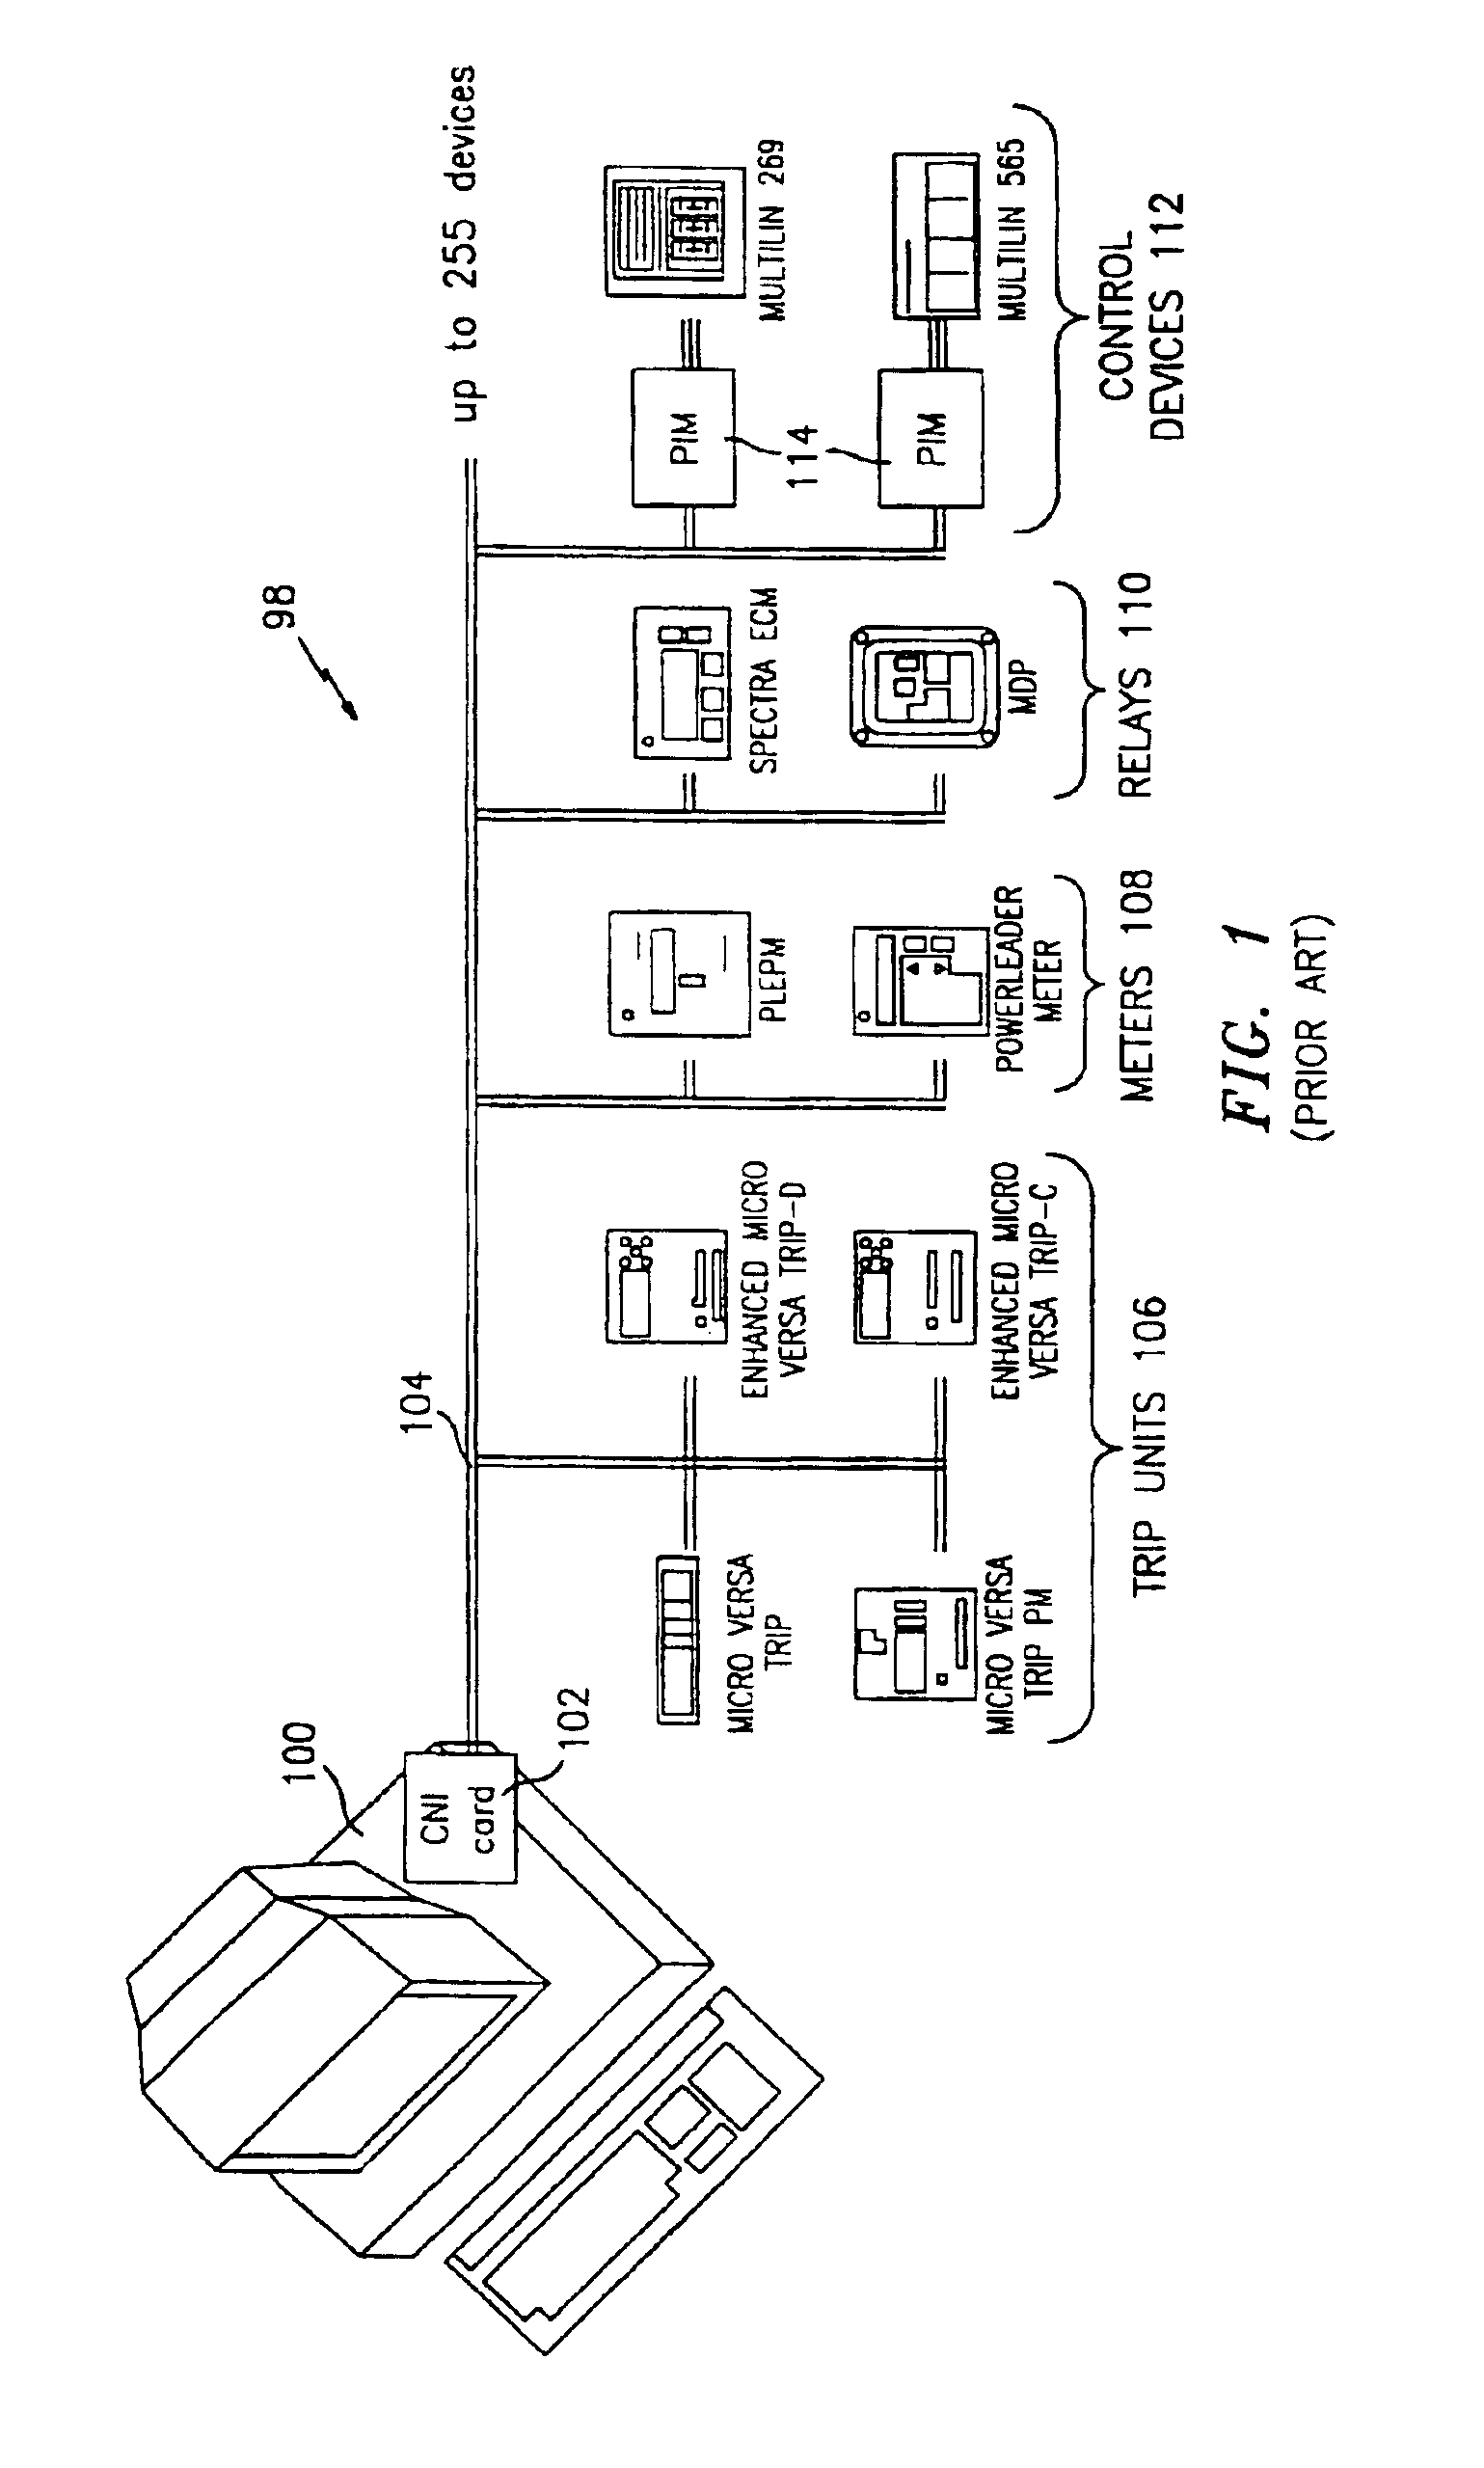 Man machine interface for power management control systems